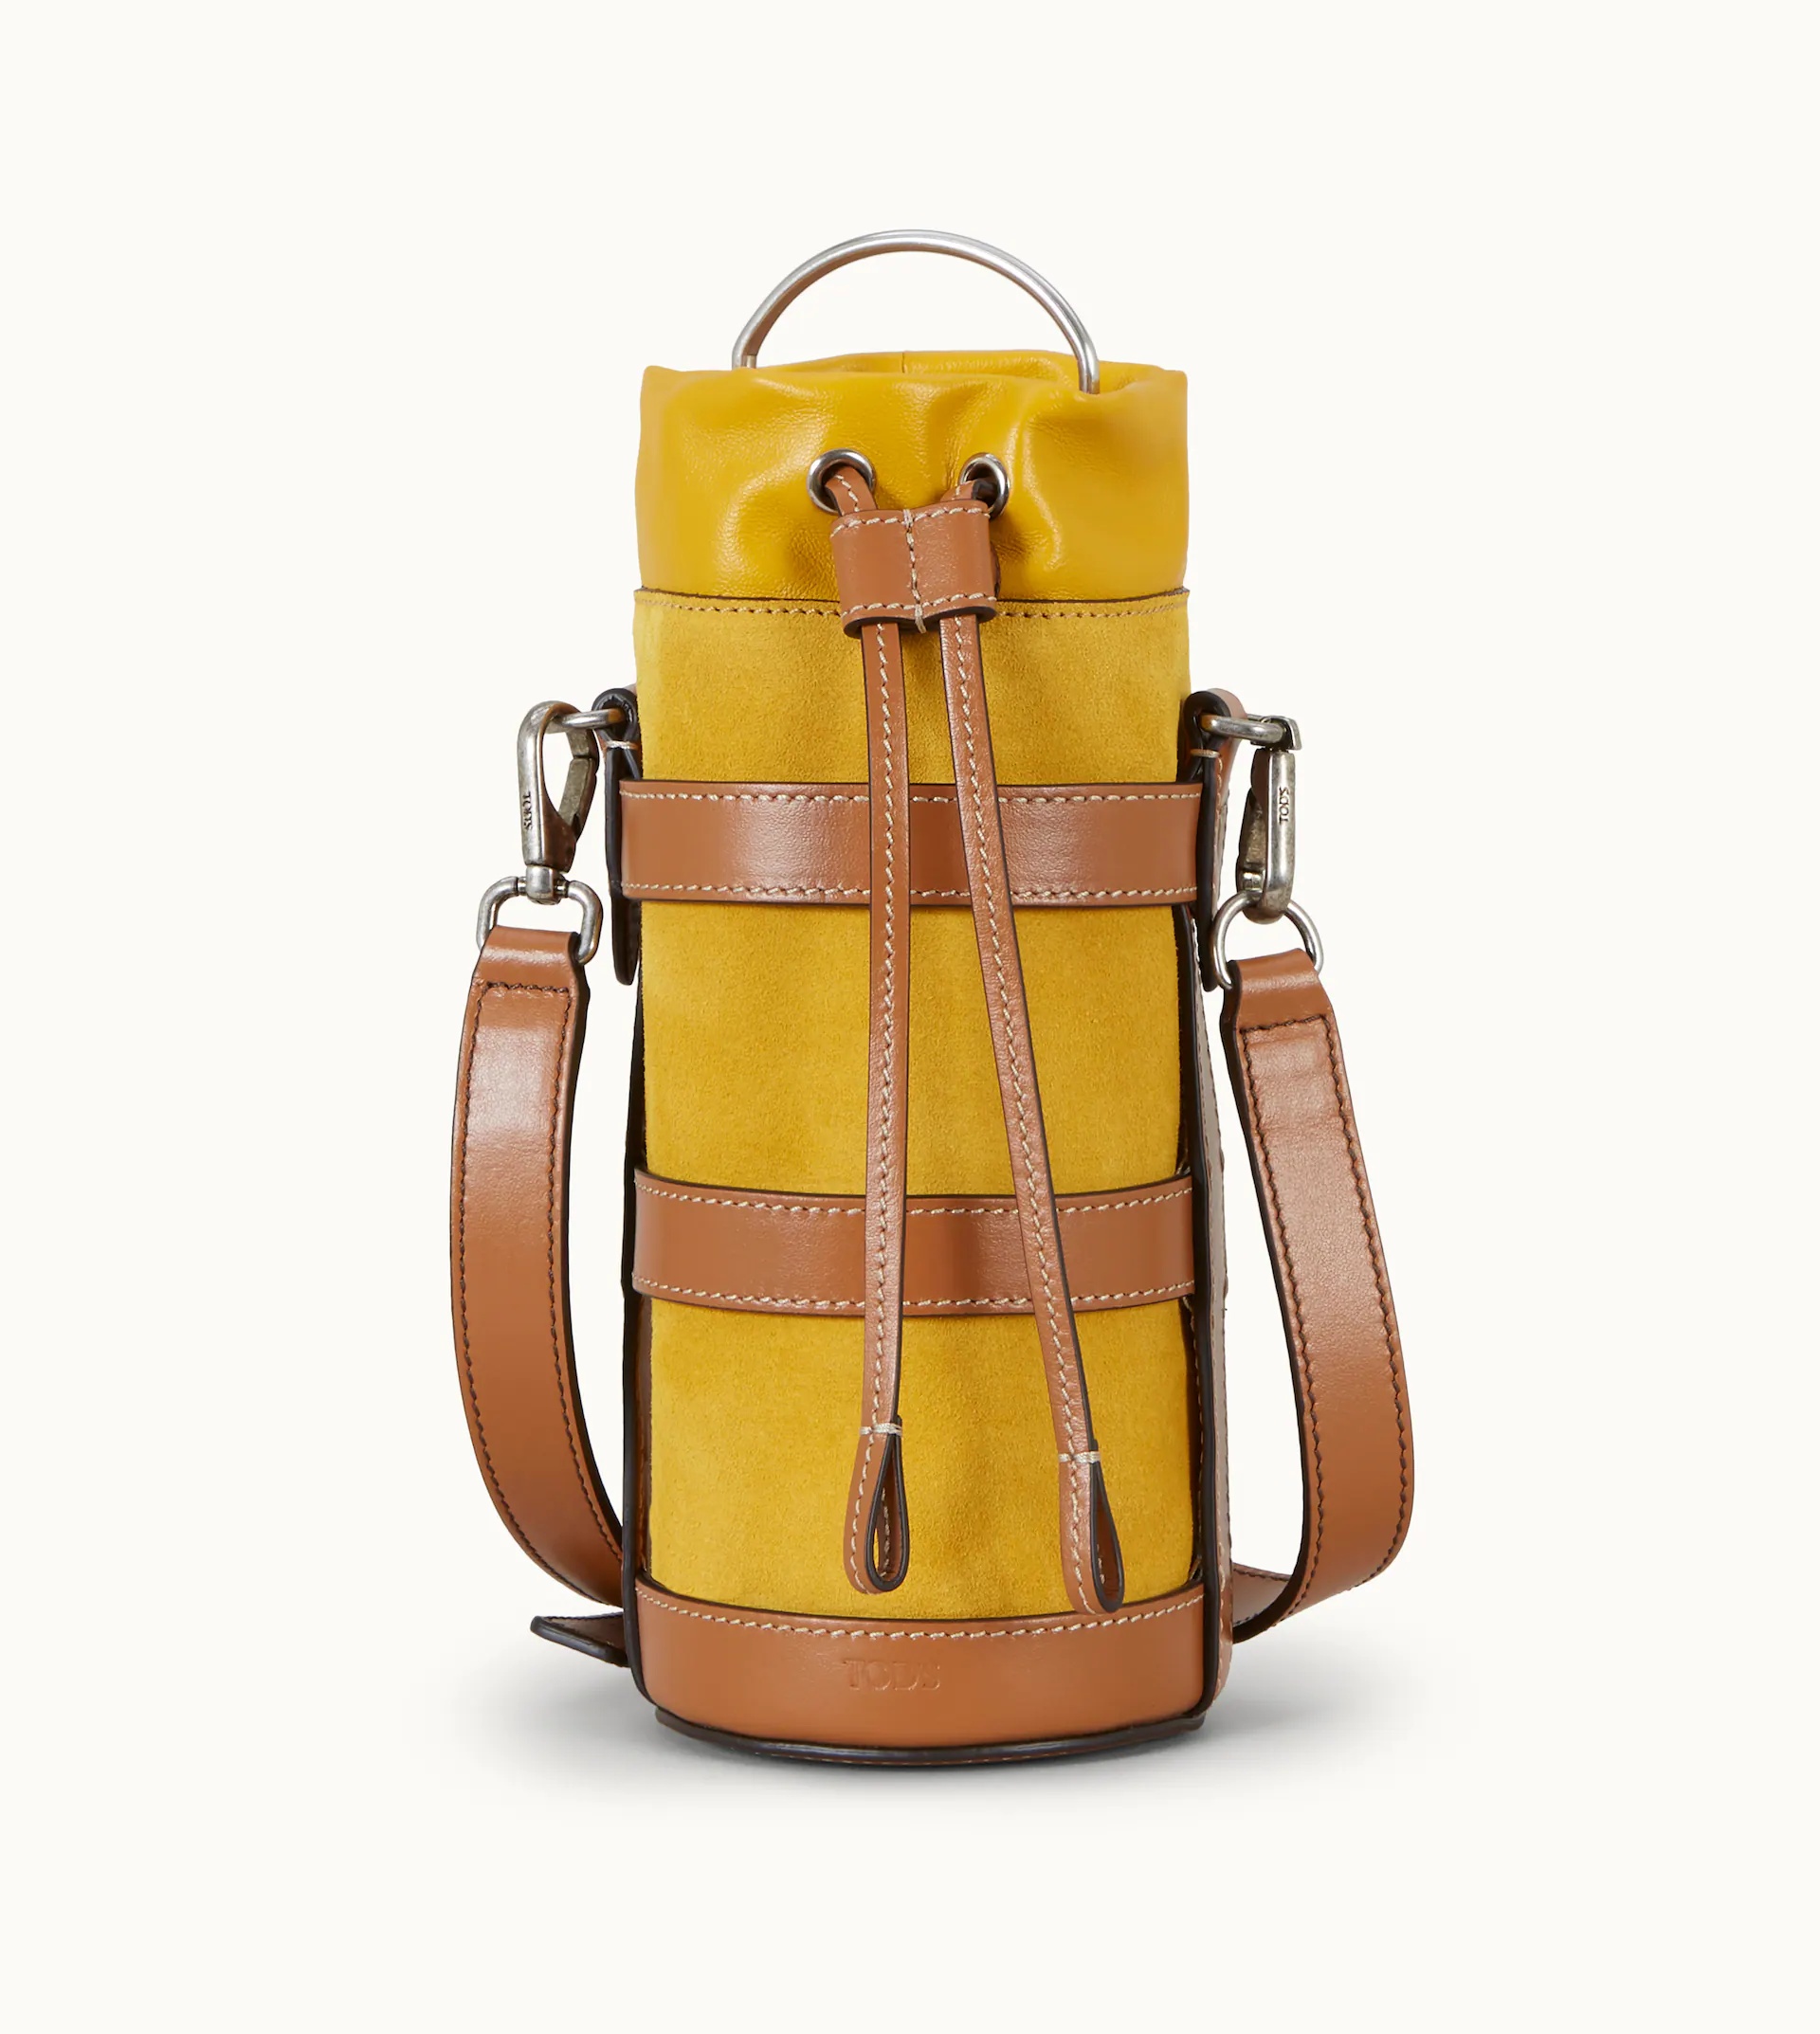 WATER BOTTLE - YELLOW, BROWN - 1